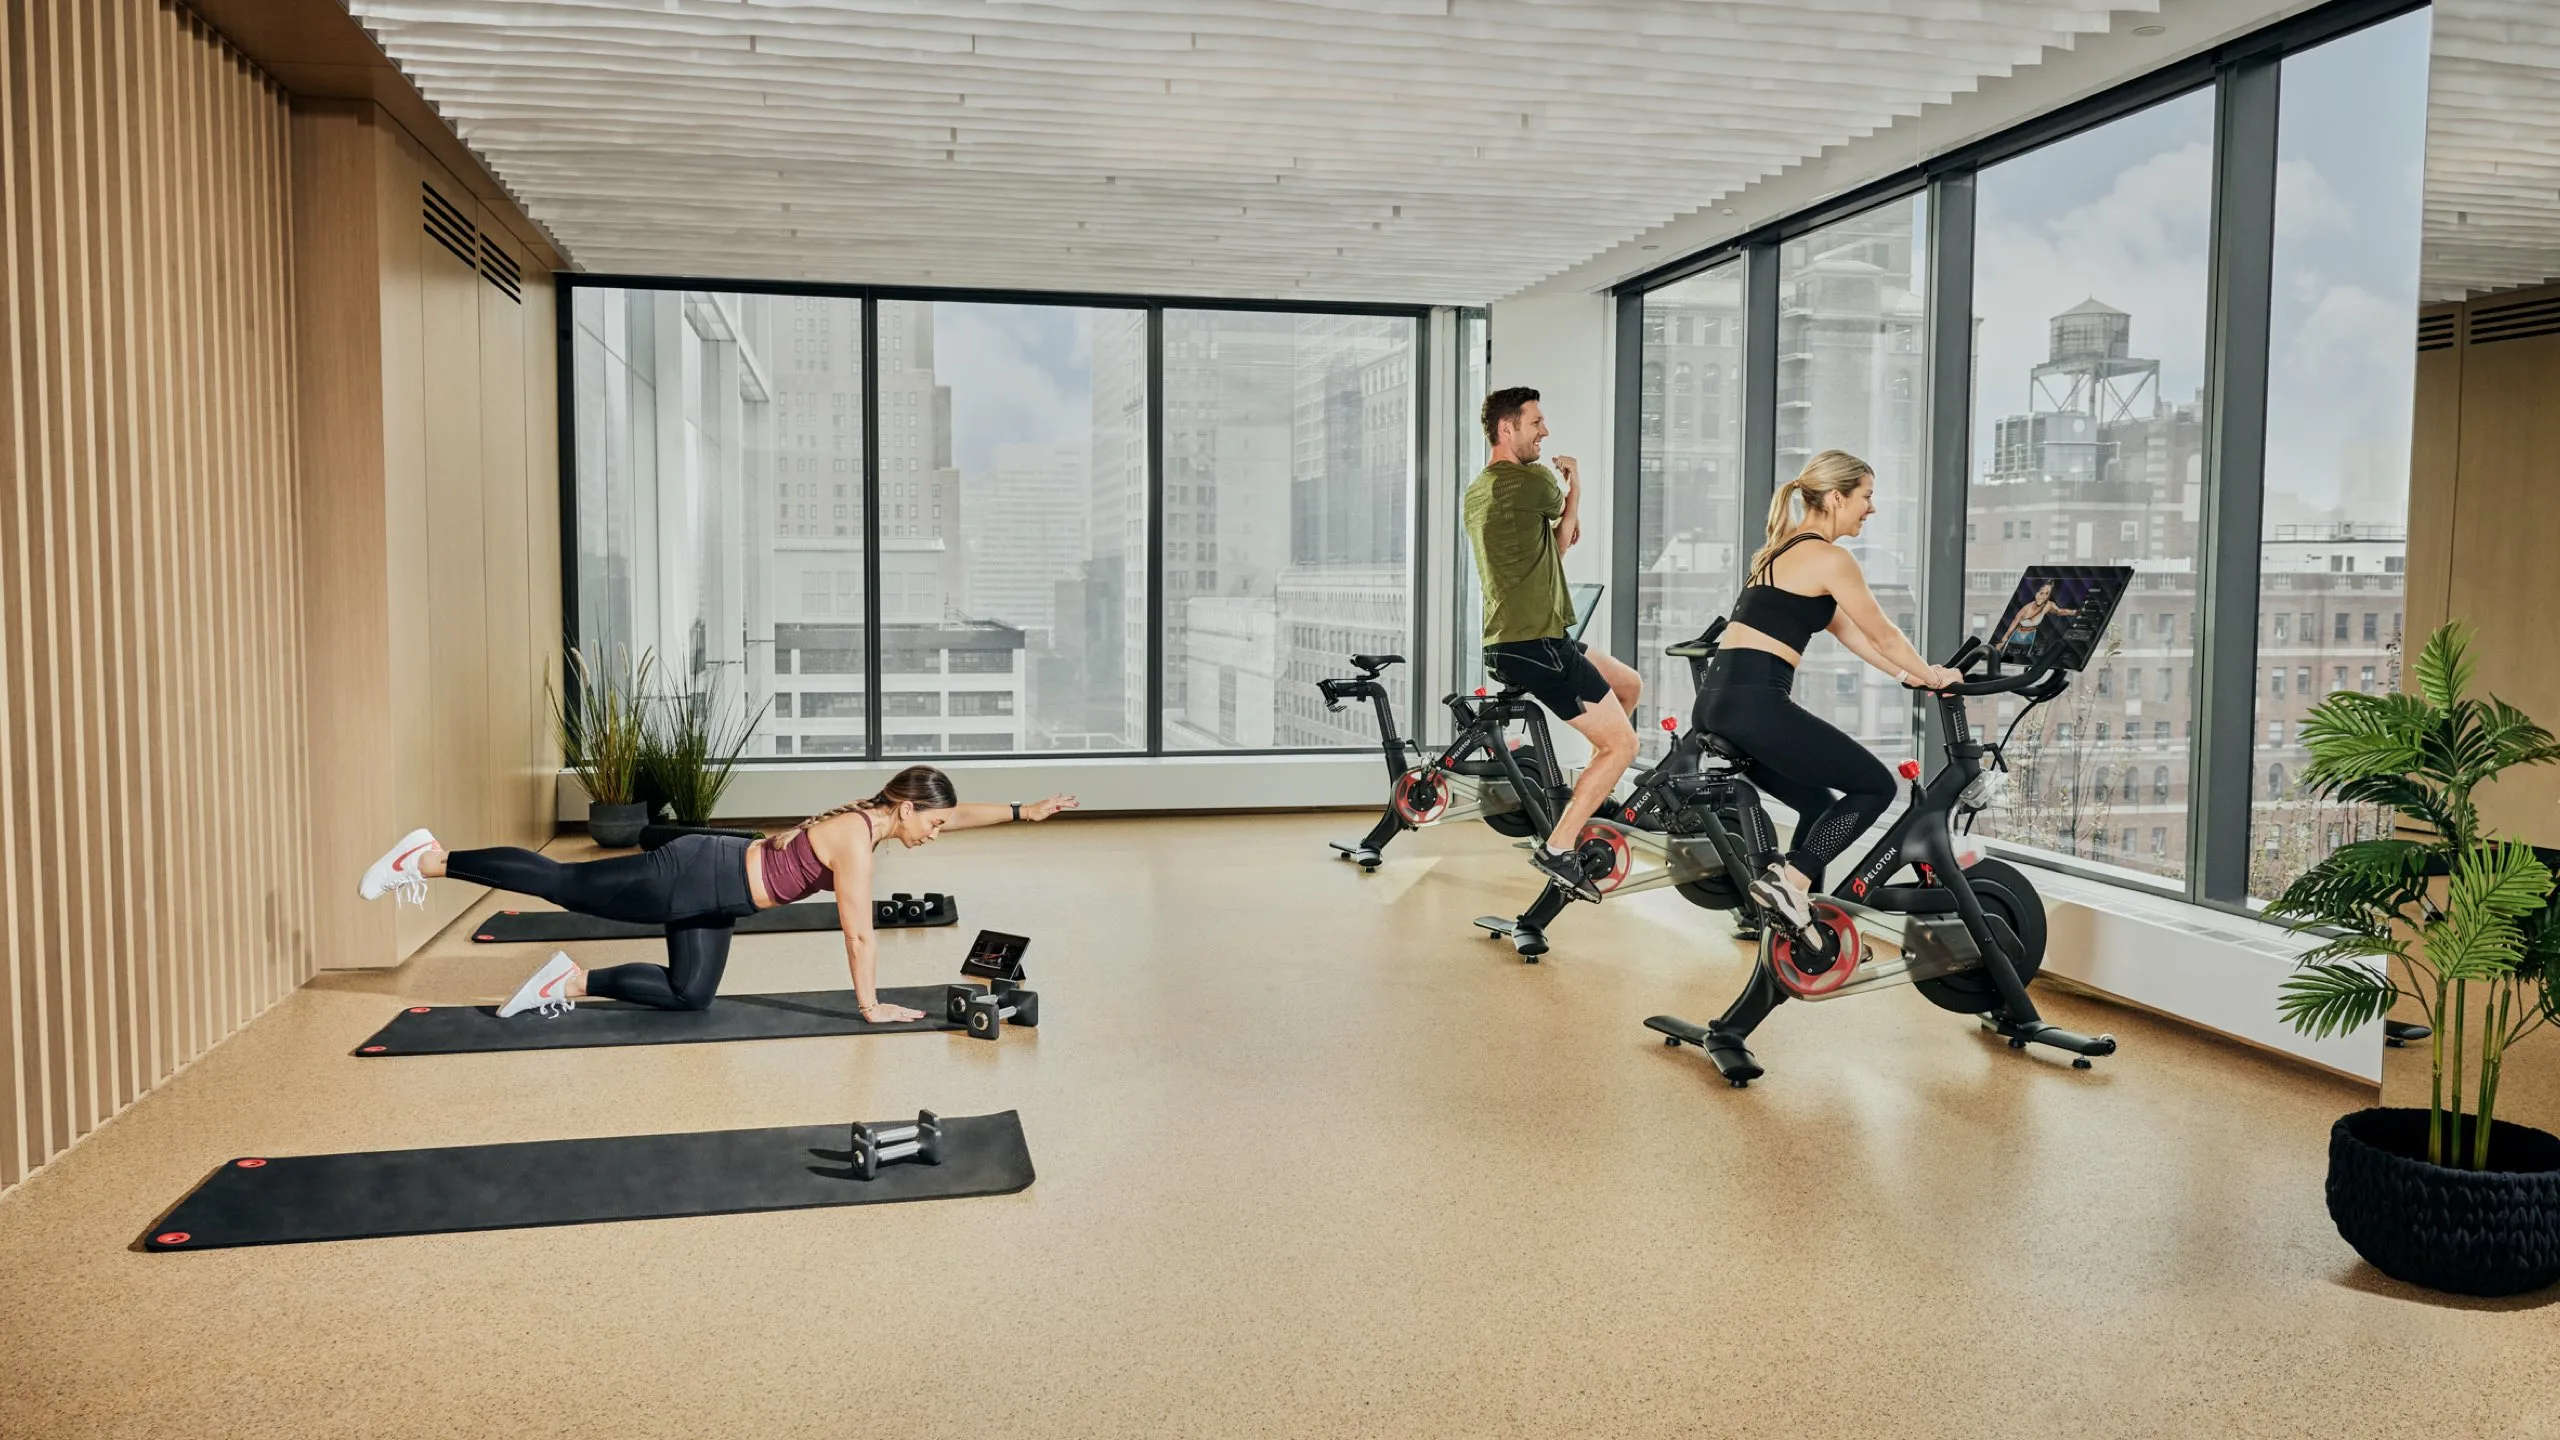 Exercisers using Peloton stationary bikes in a gym